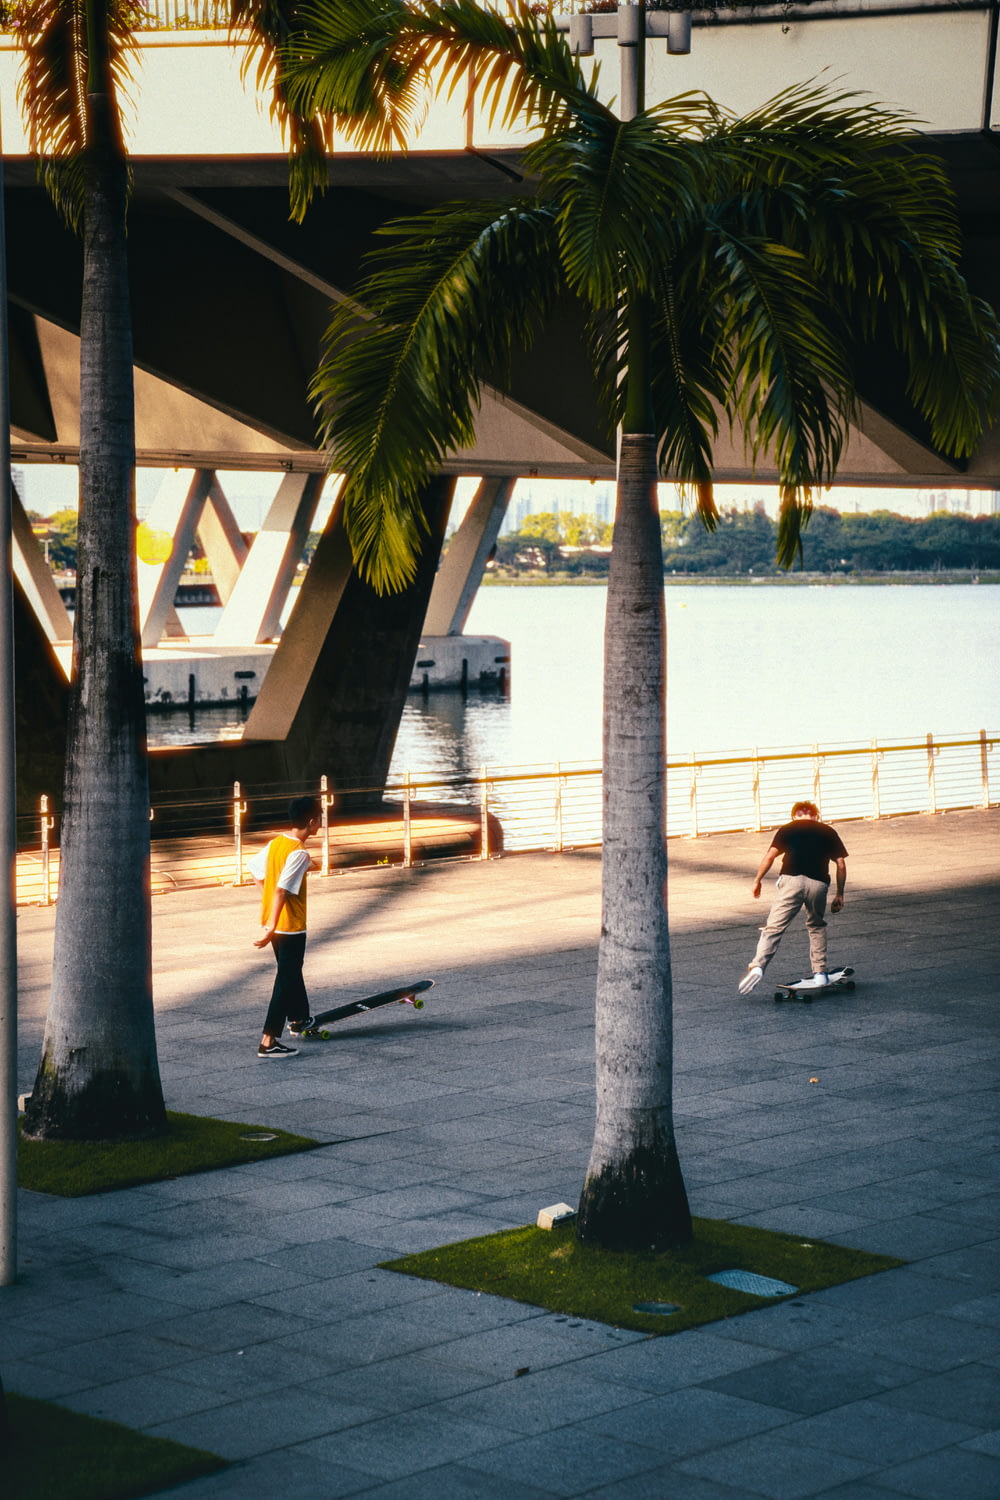 a group of people riding skateboards down a sidewalk